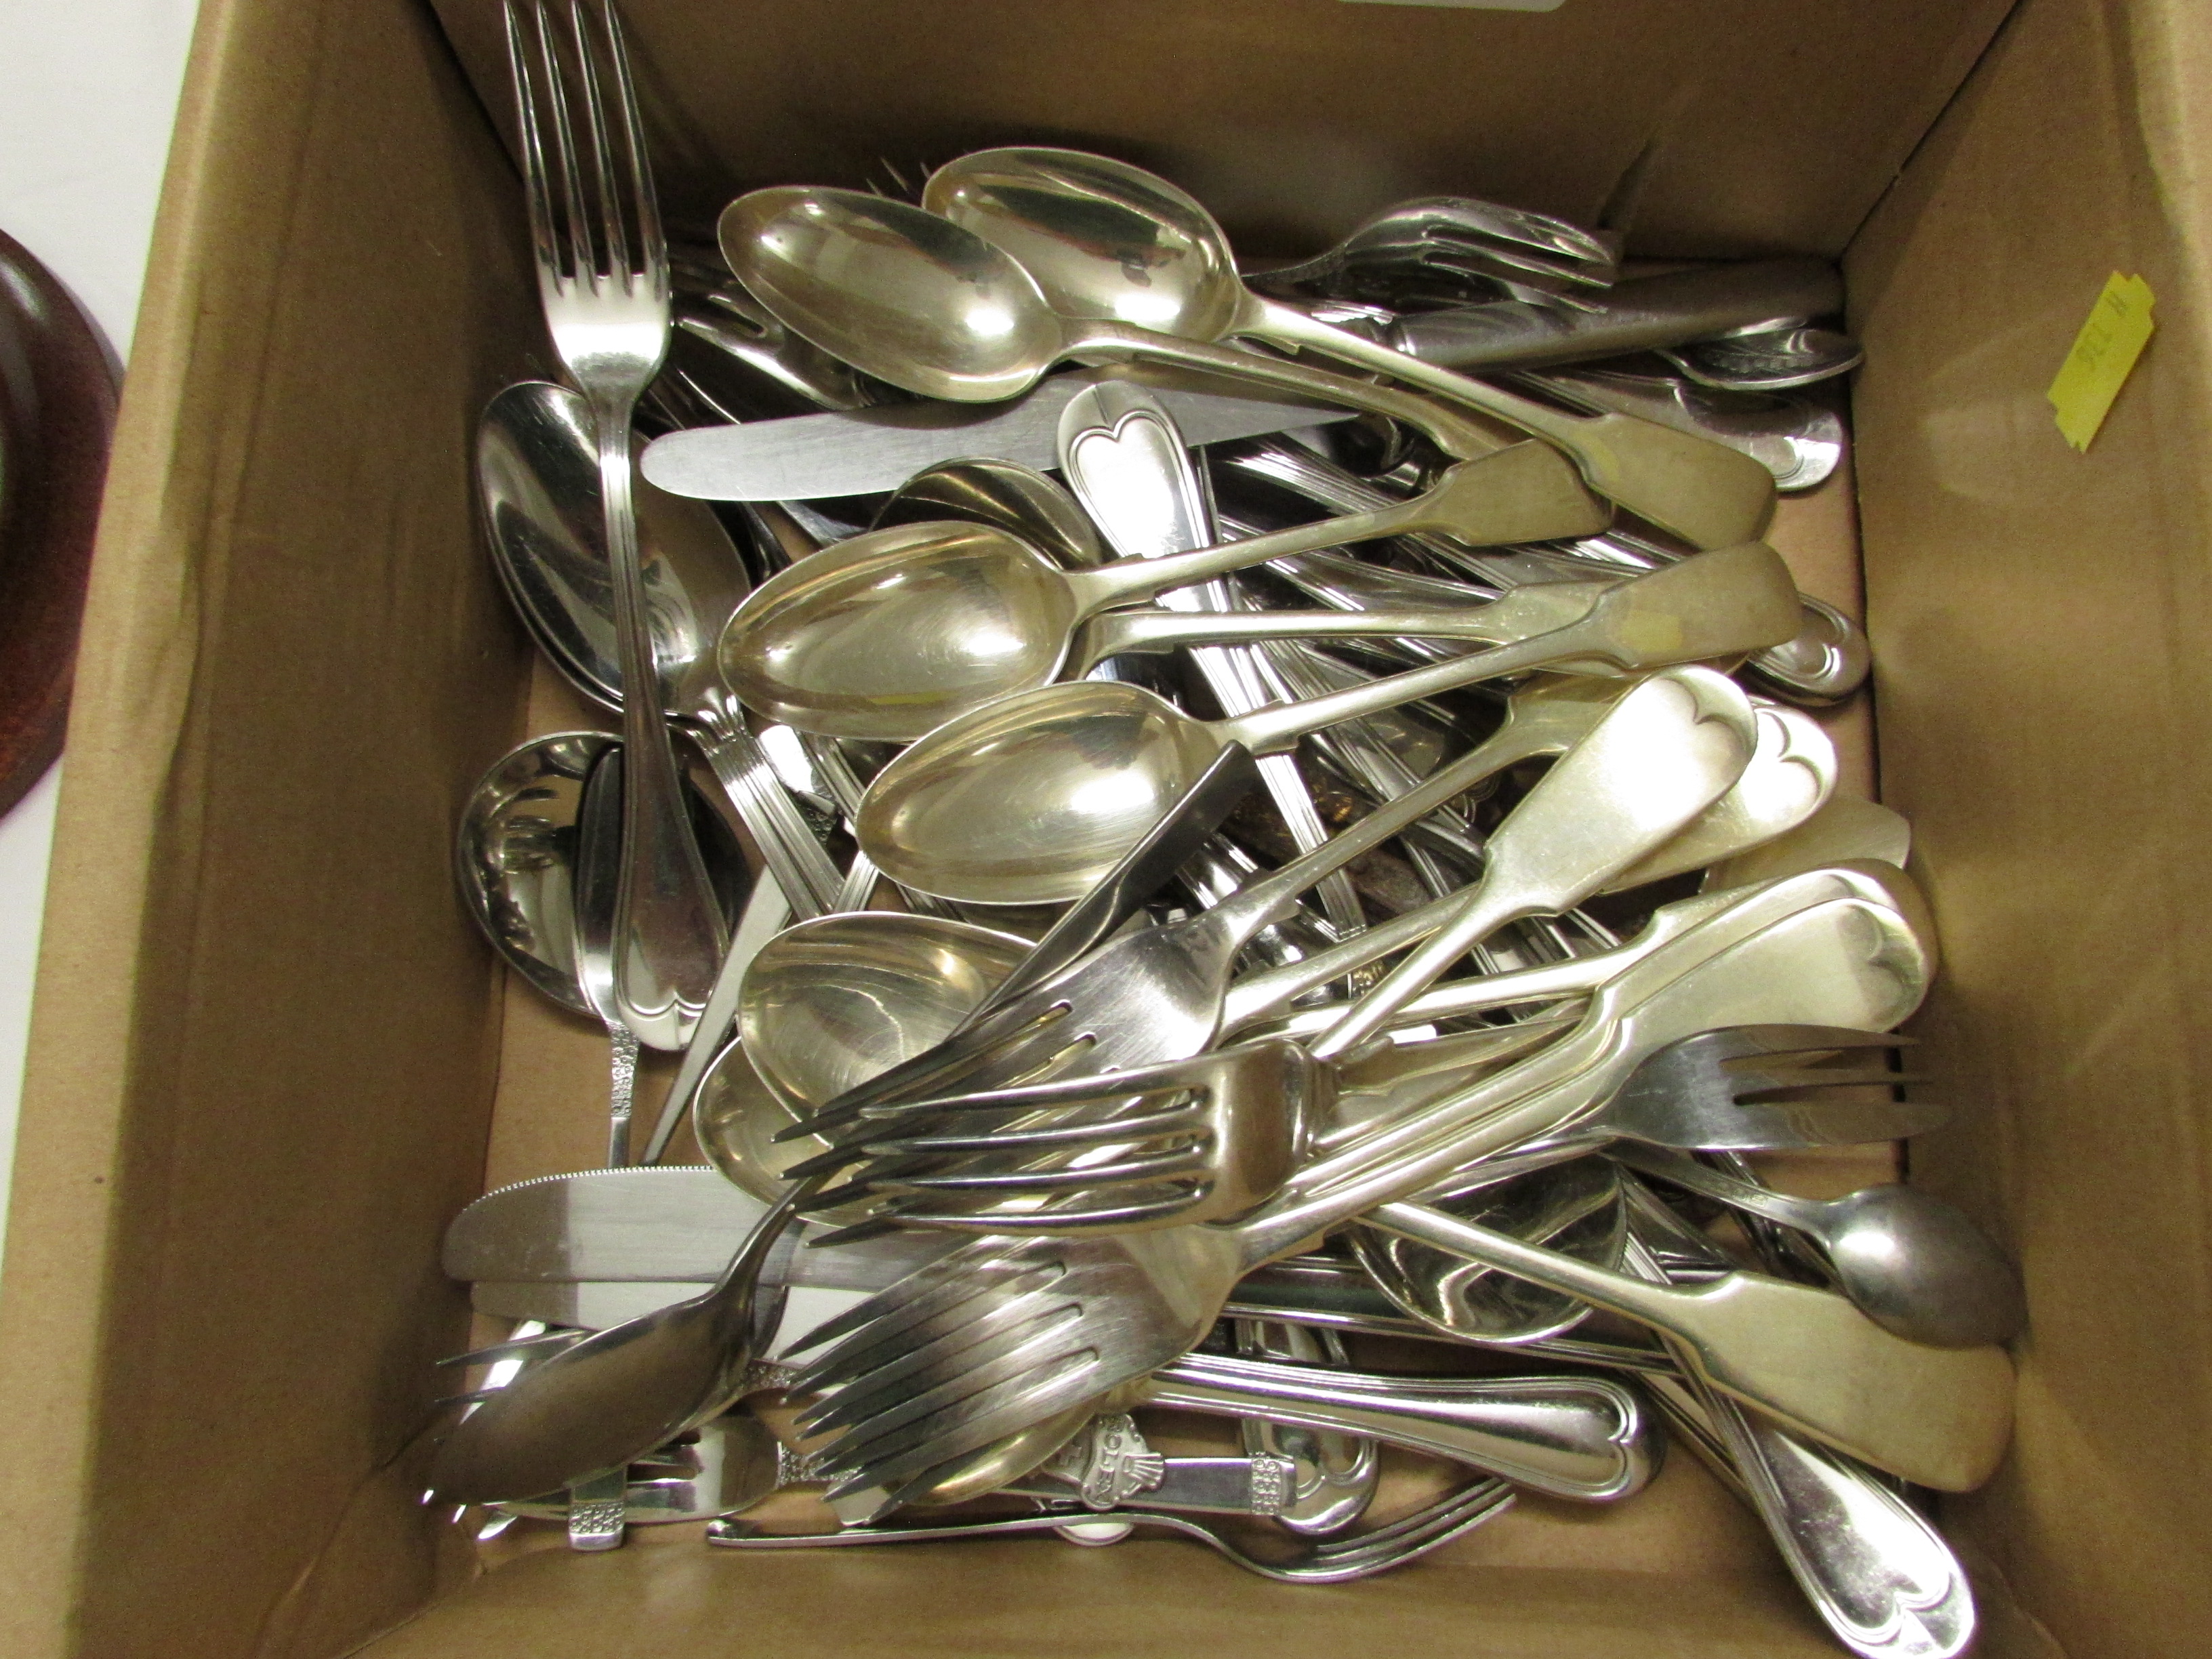 PLANISHED PEWTER TRAY, SILVER-PLATED BOWL ON FOOT, ASSORTED CUTLERY AND OTHER METAL WARE - Image 3 of 3